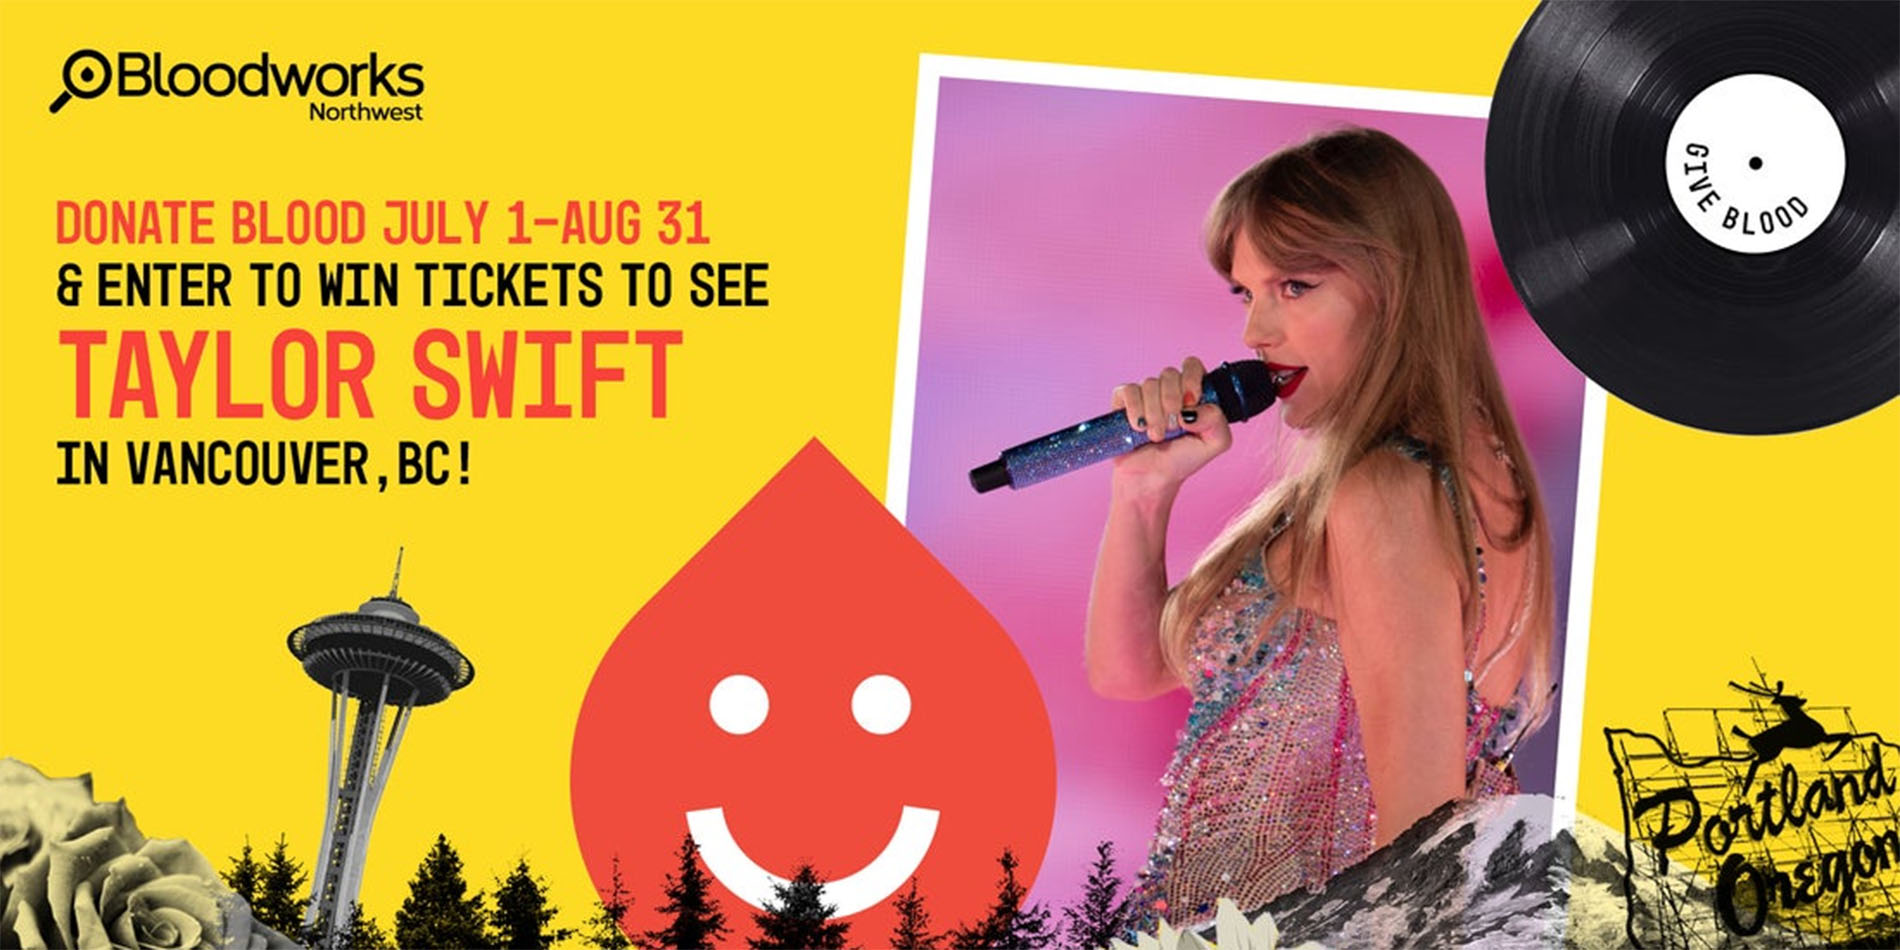 event image with photo of taylor swift